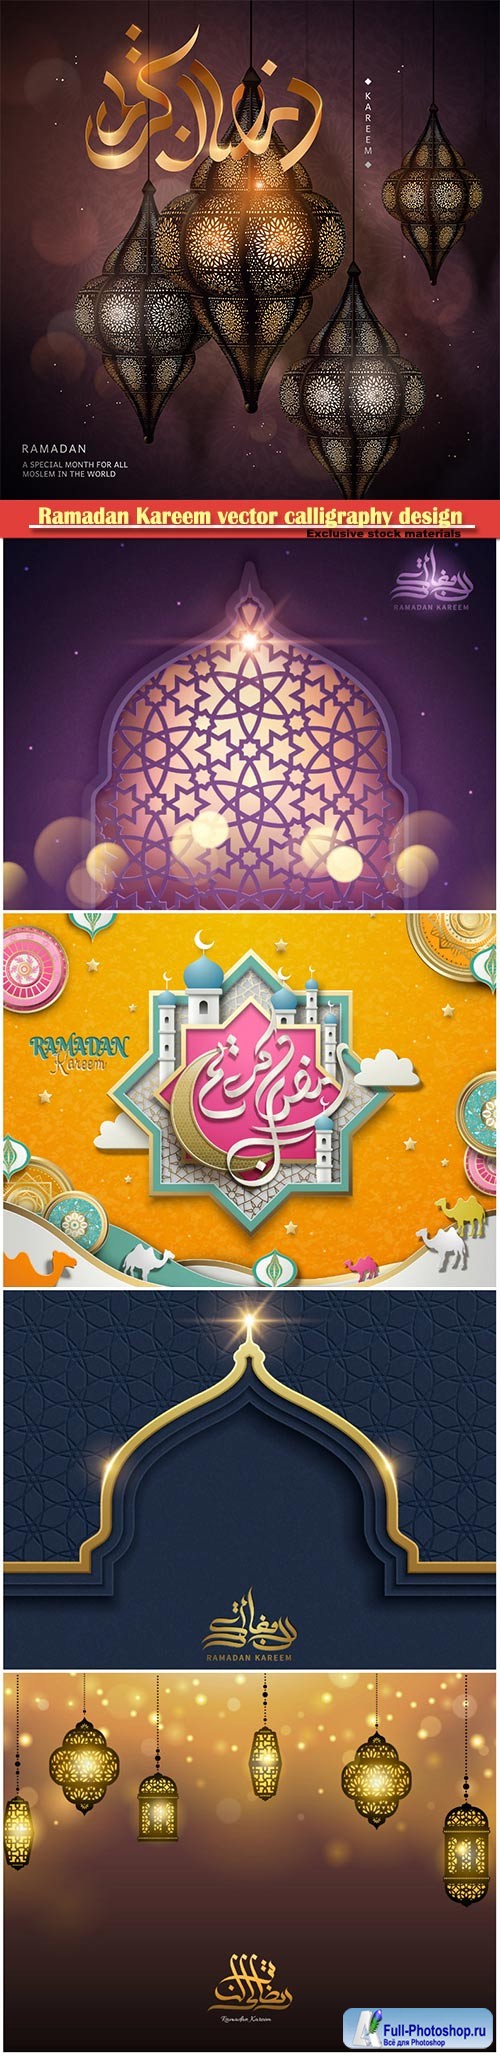 Ramadan Kareem vector calligraphy design with decorative floral pattern,mosque silhouette, crescent and glittering islamic background # 15